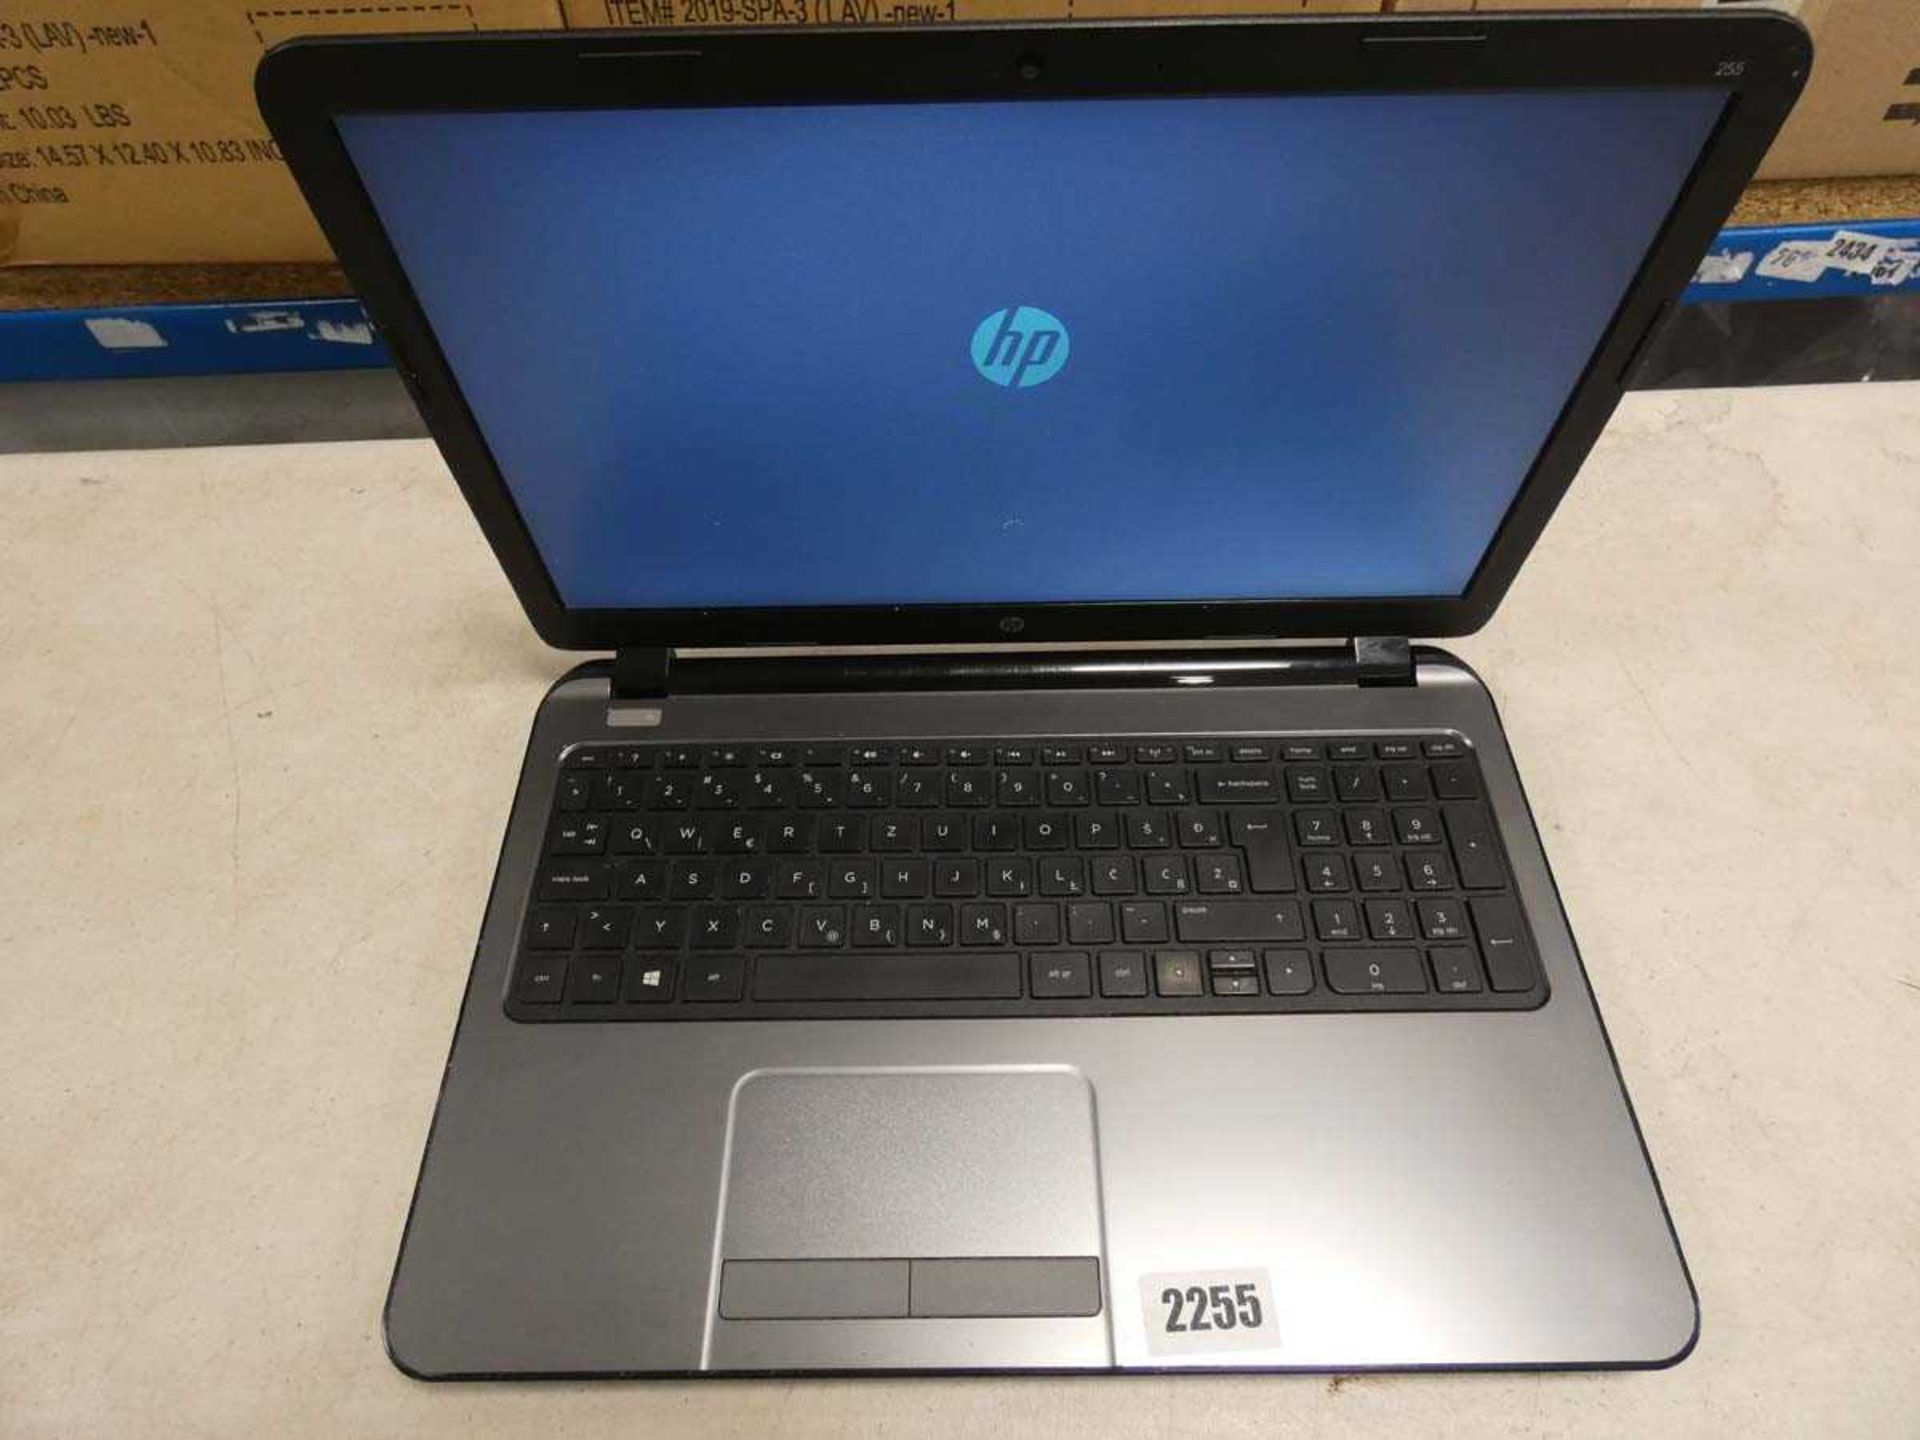 HP laptop model: 255G3, including PSU (untested)